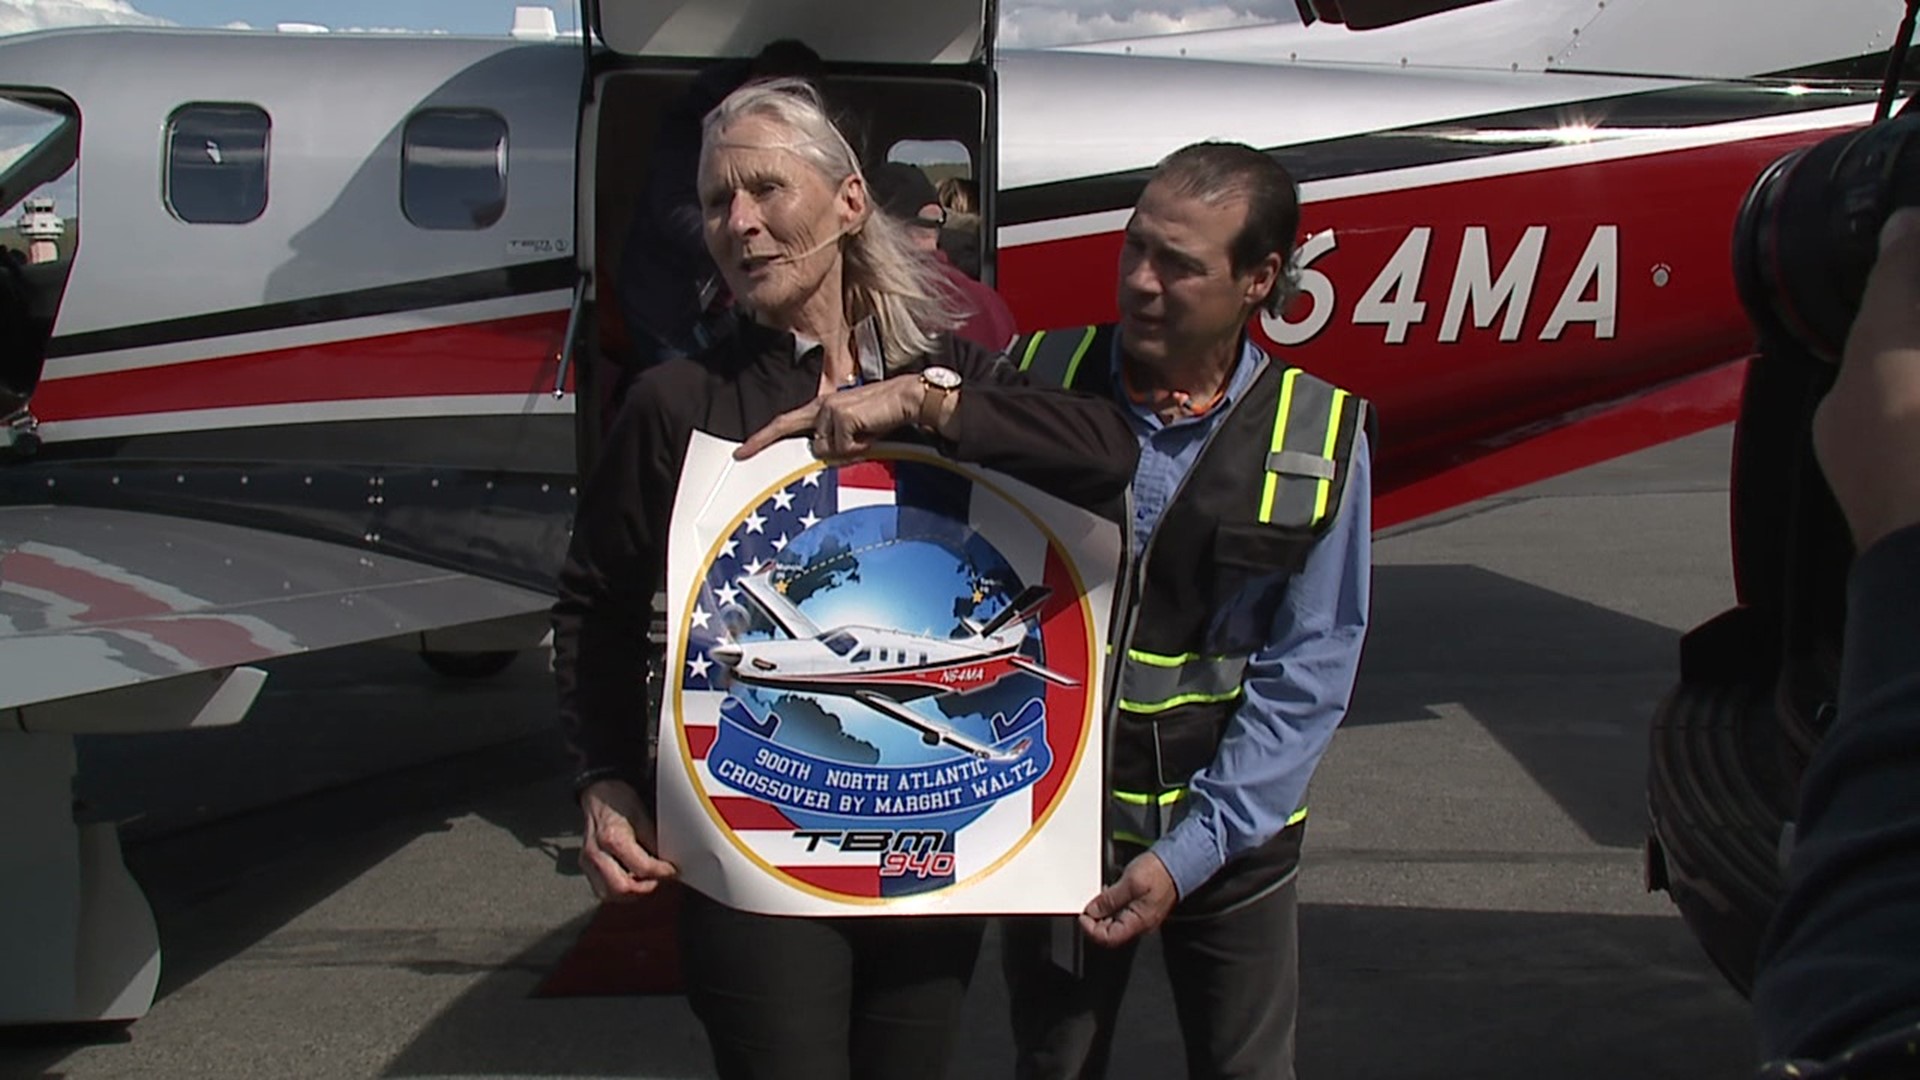 Margit Waltz is a ferry pilot, delivering new, single-engine planes from a factory in France, across the Atlantic, and to destinations around the world.